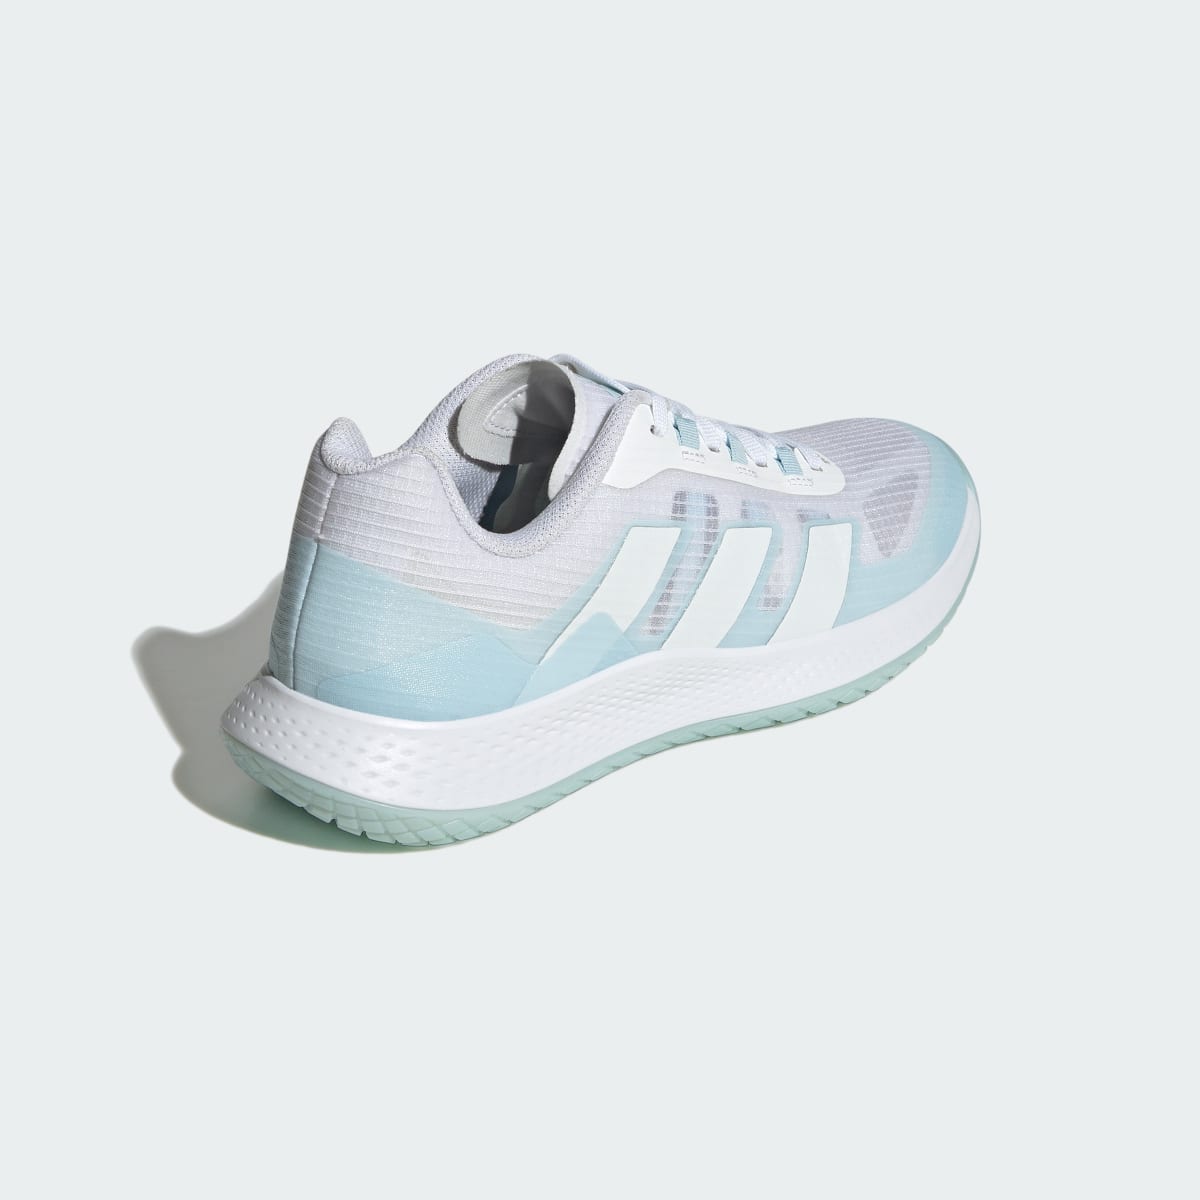 Adidas Forcebounce Volleyball Schuh. 6